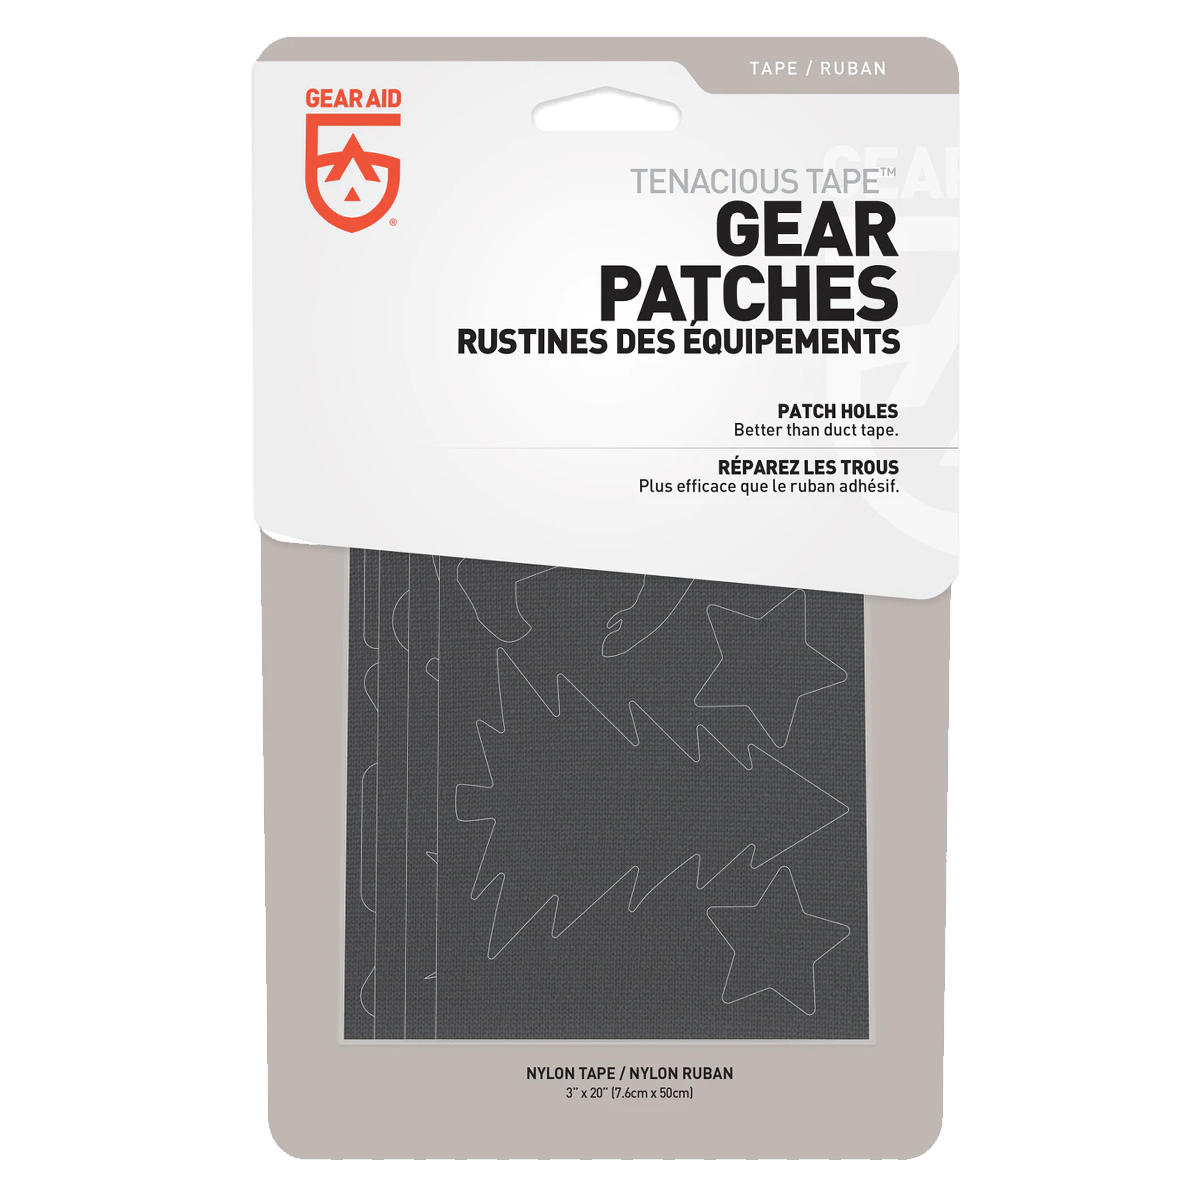 Tenacious Tape Gear Patches Outdoors alternate view